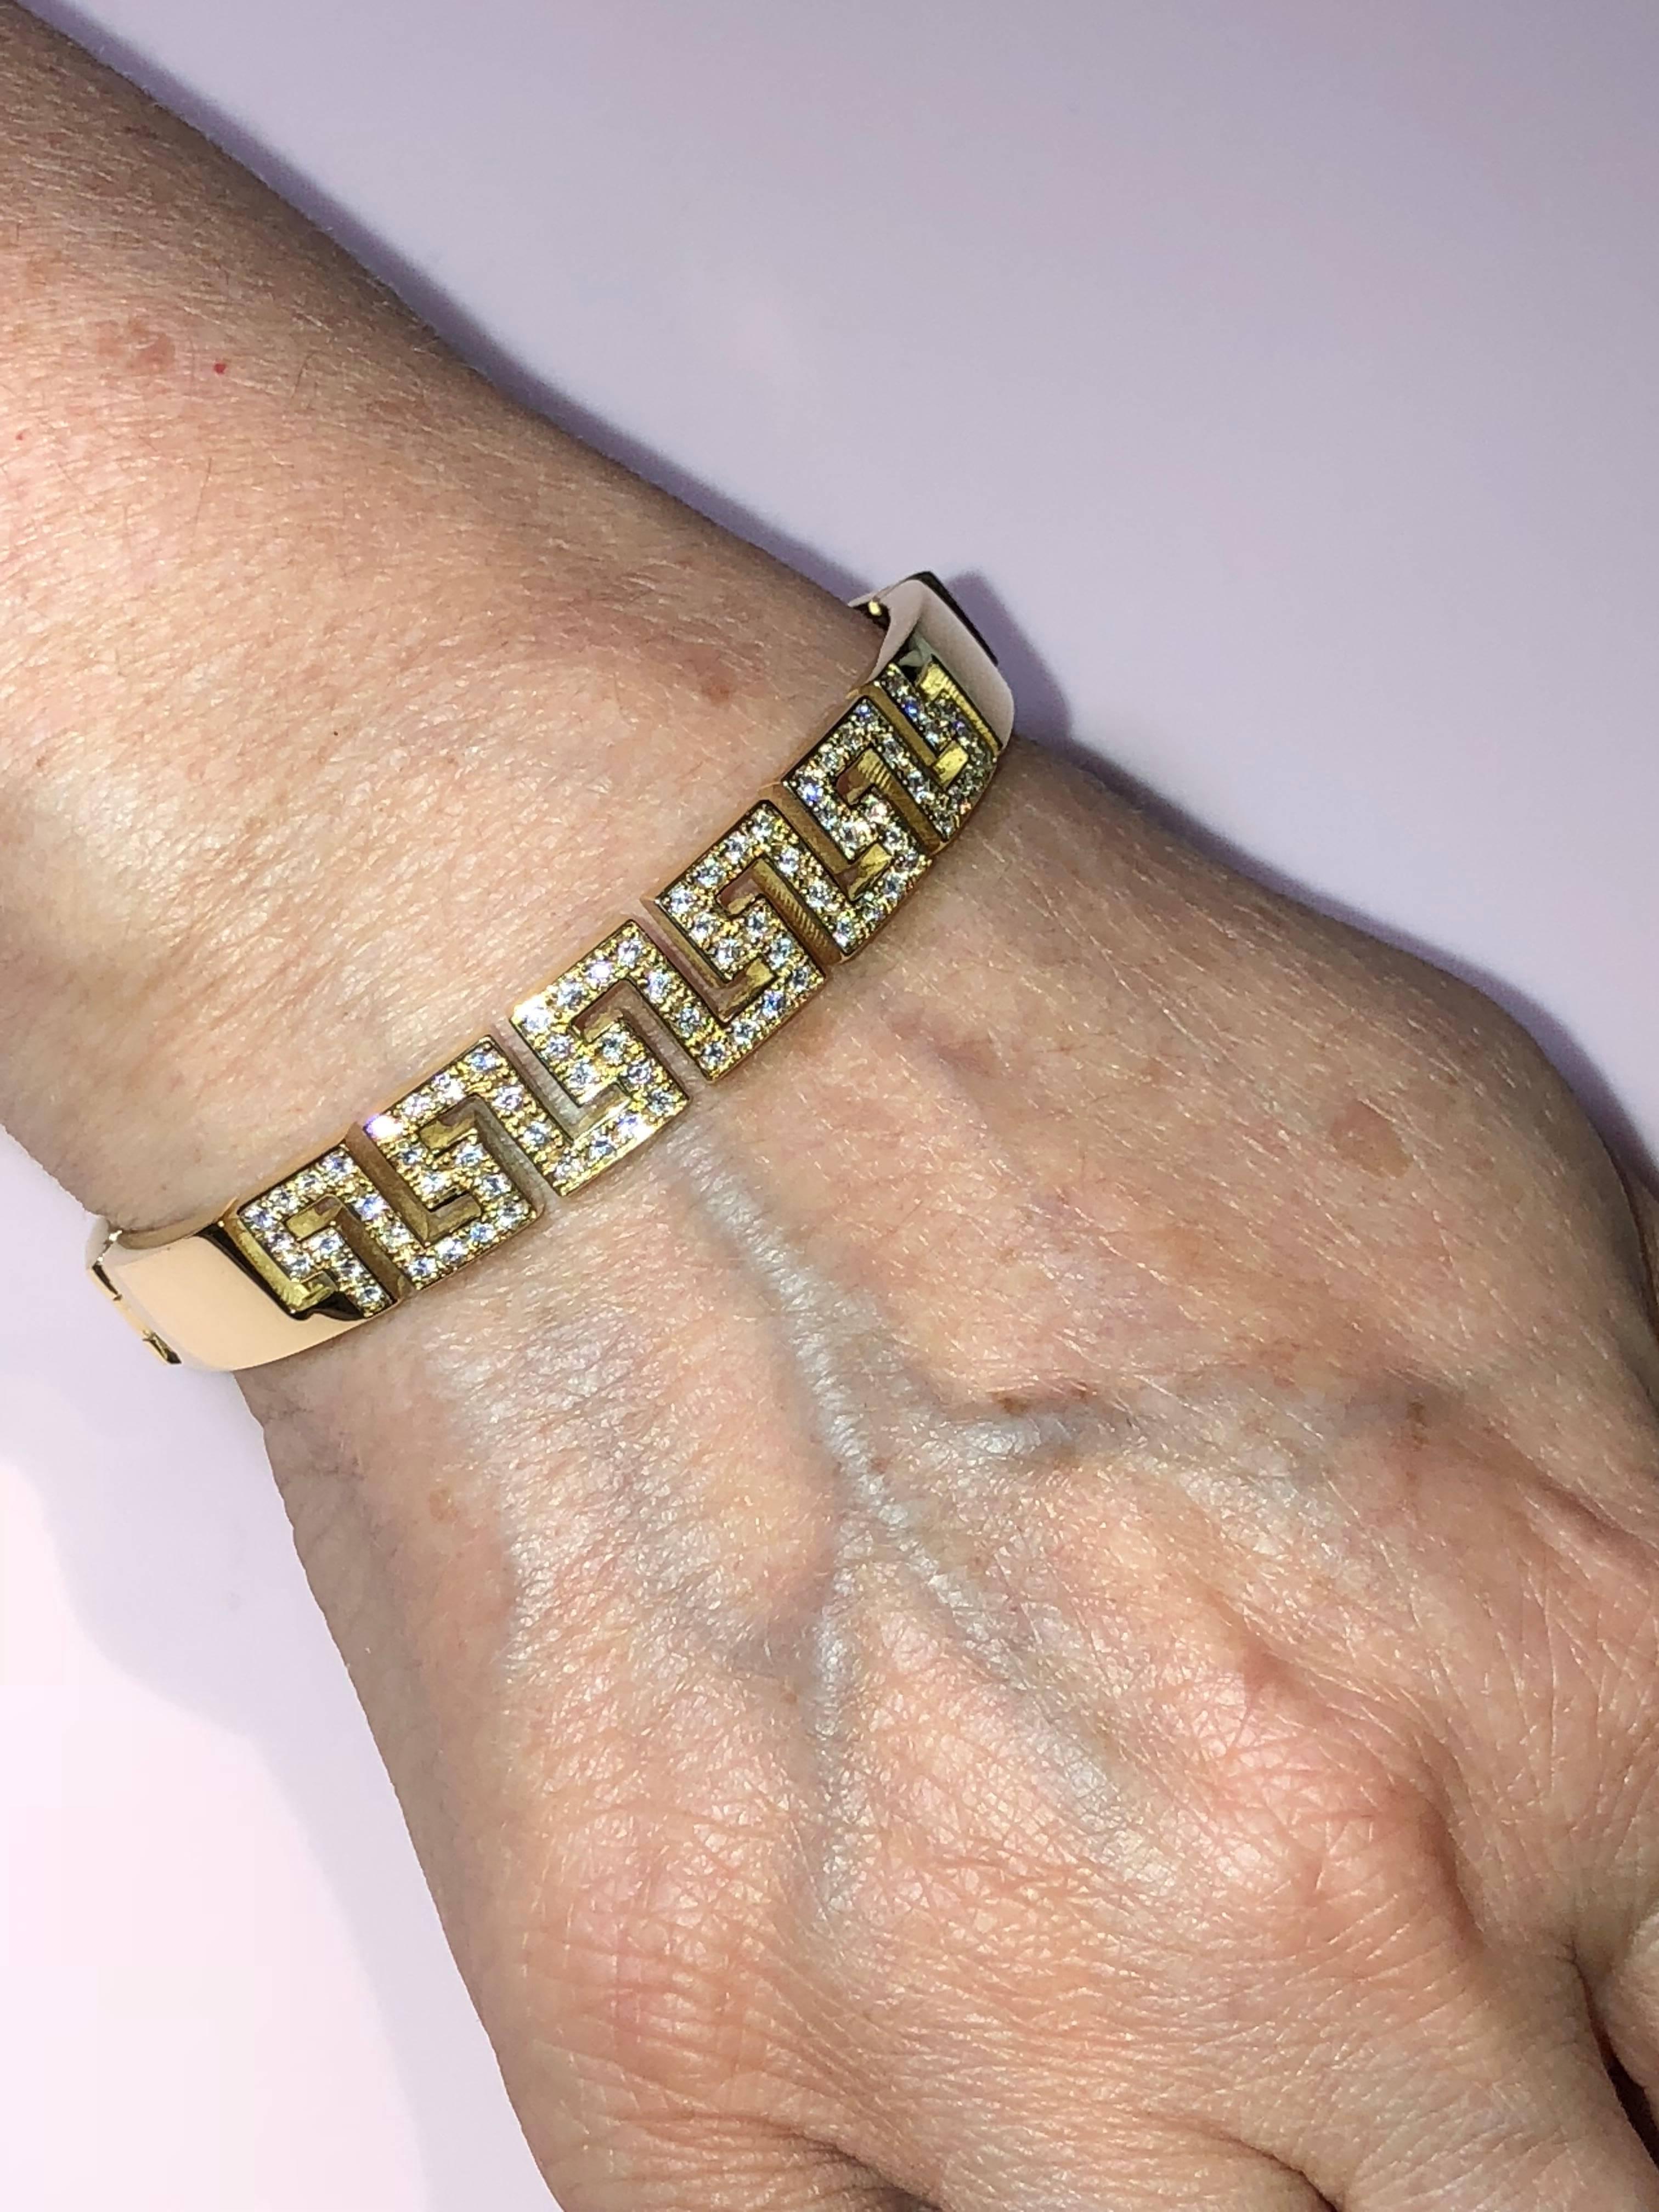 S.Georgios designer bracelet in solid yellow gold 18 karat all handmade with the Greek Key design, the symbol of eternal life. The Bracelet is custom made and has brilliant cut white diamonds total weight of 1.02 Carat and for more security, it has